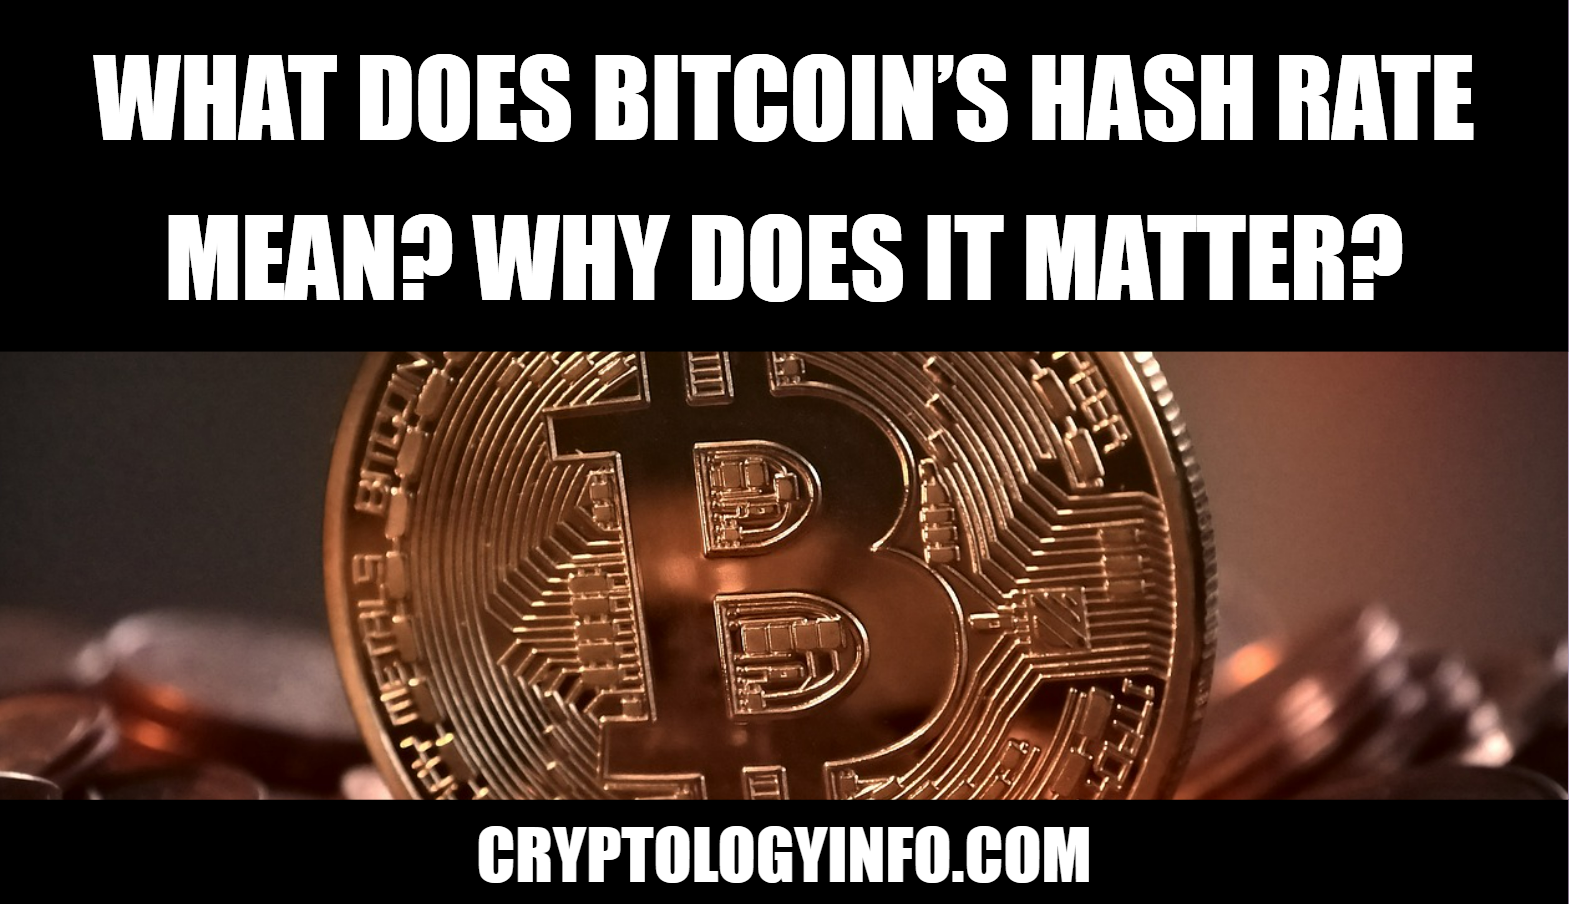 What Does Bitcoin’s Hash Rate Mean? Why Does It Matter?